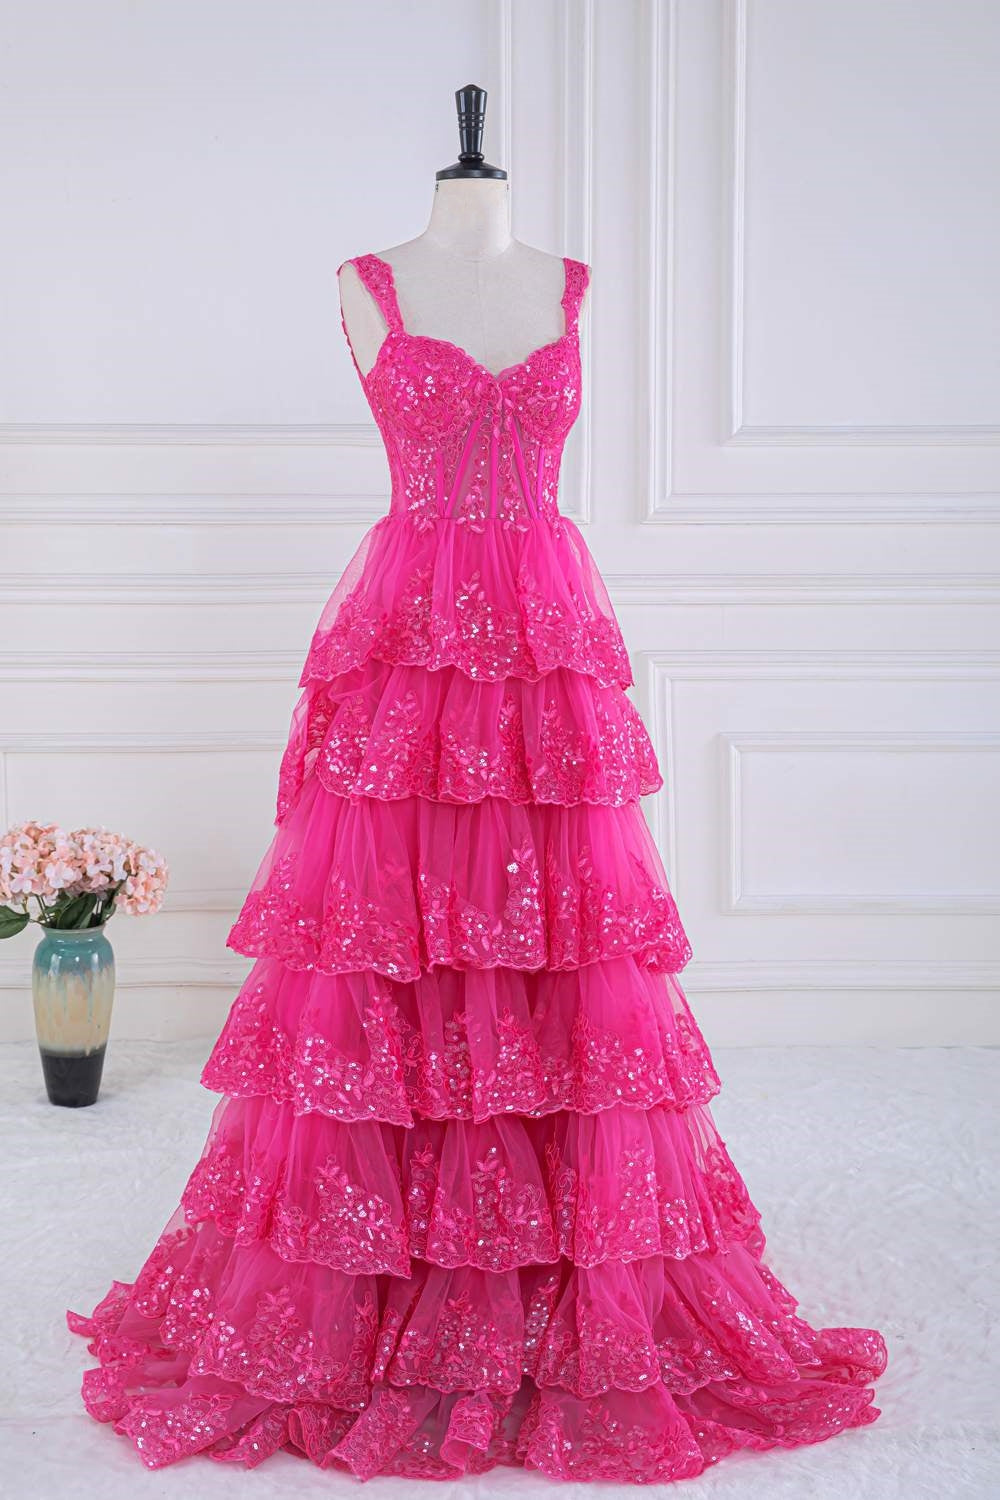 Dressime Off-the-Shoulder Ruffle Multi-Tiered Long Prom Dress